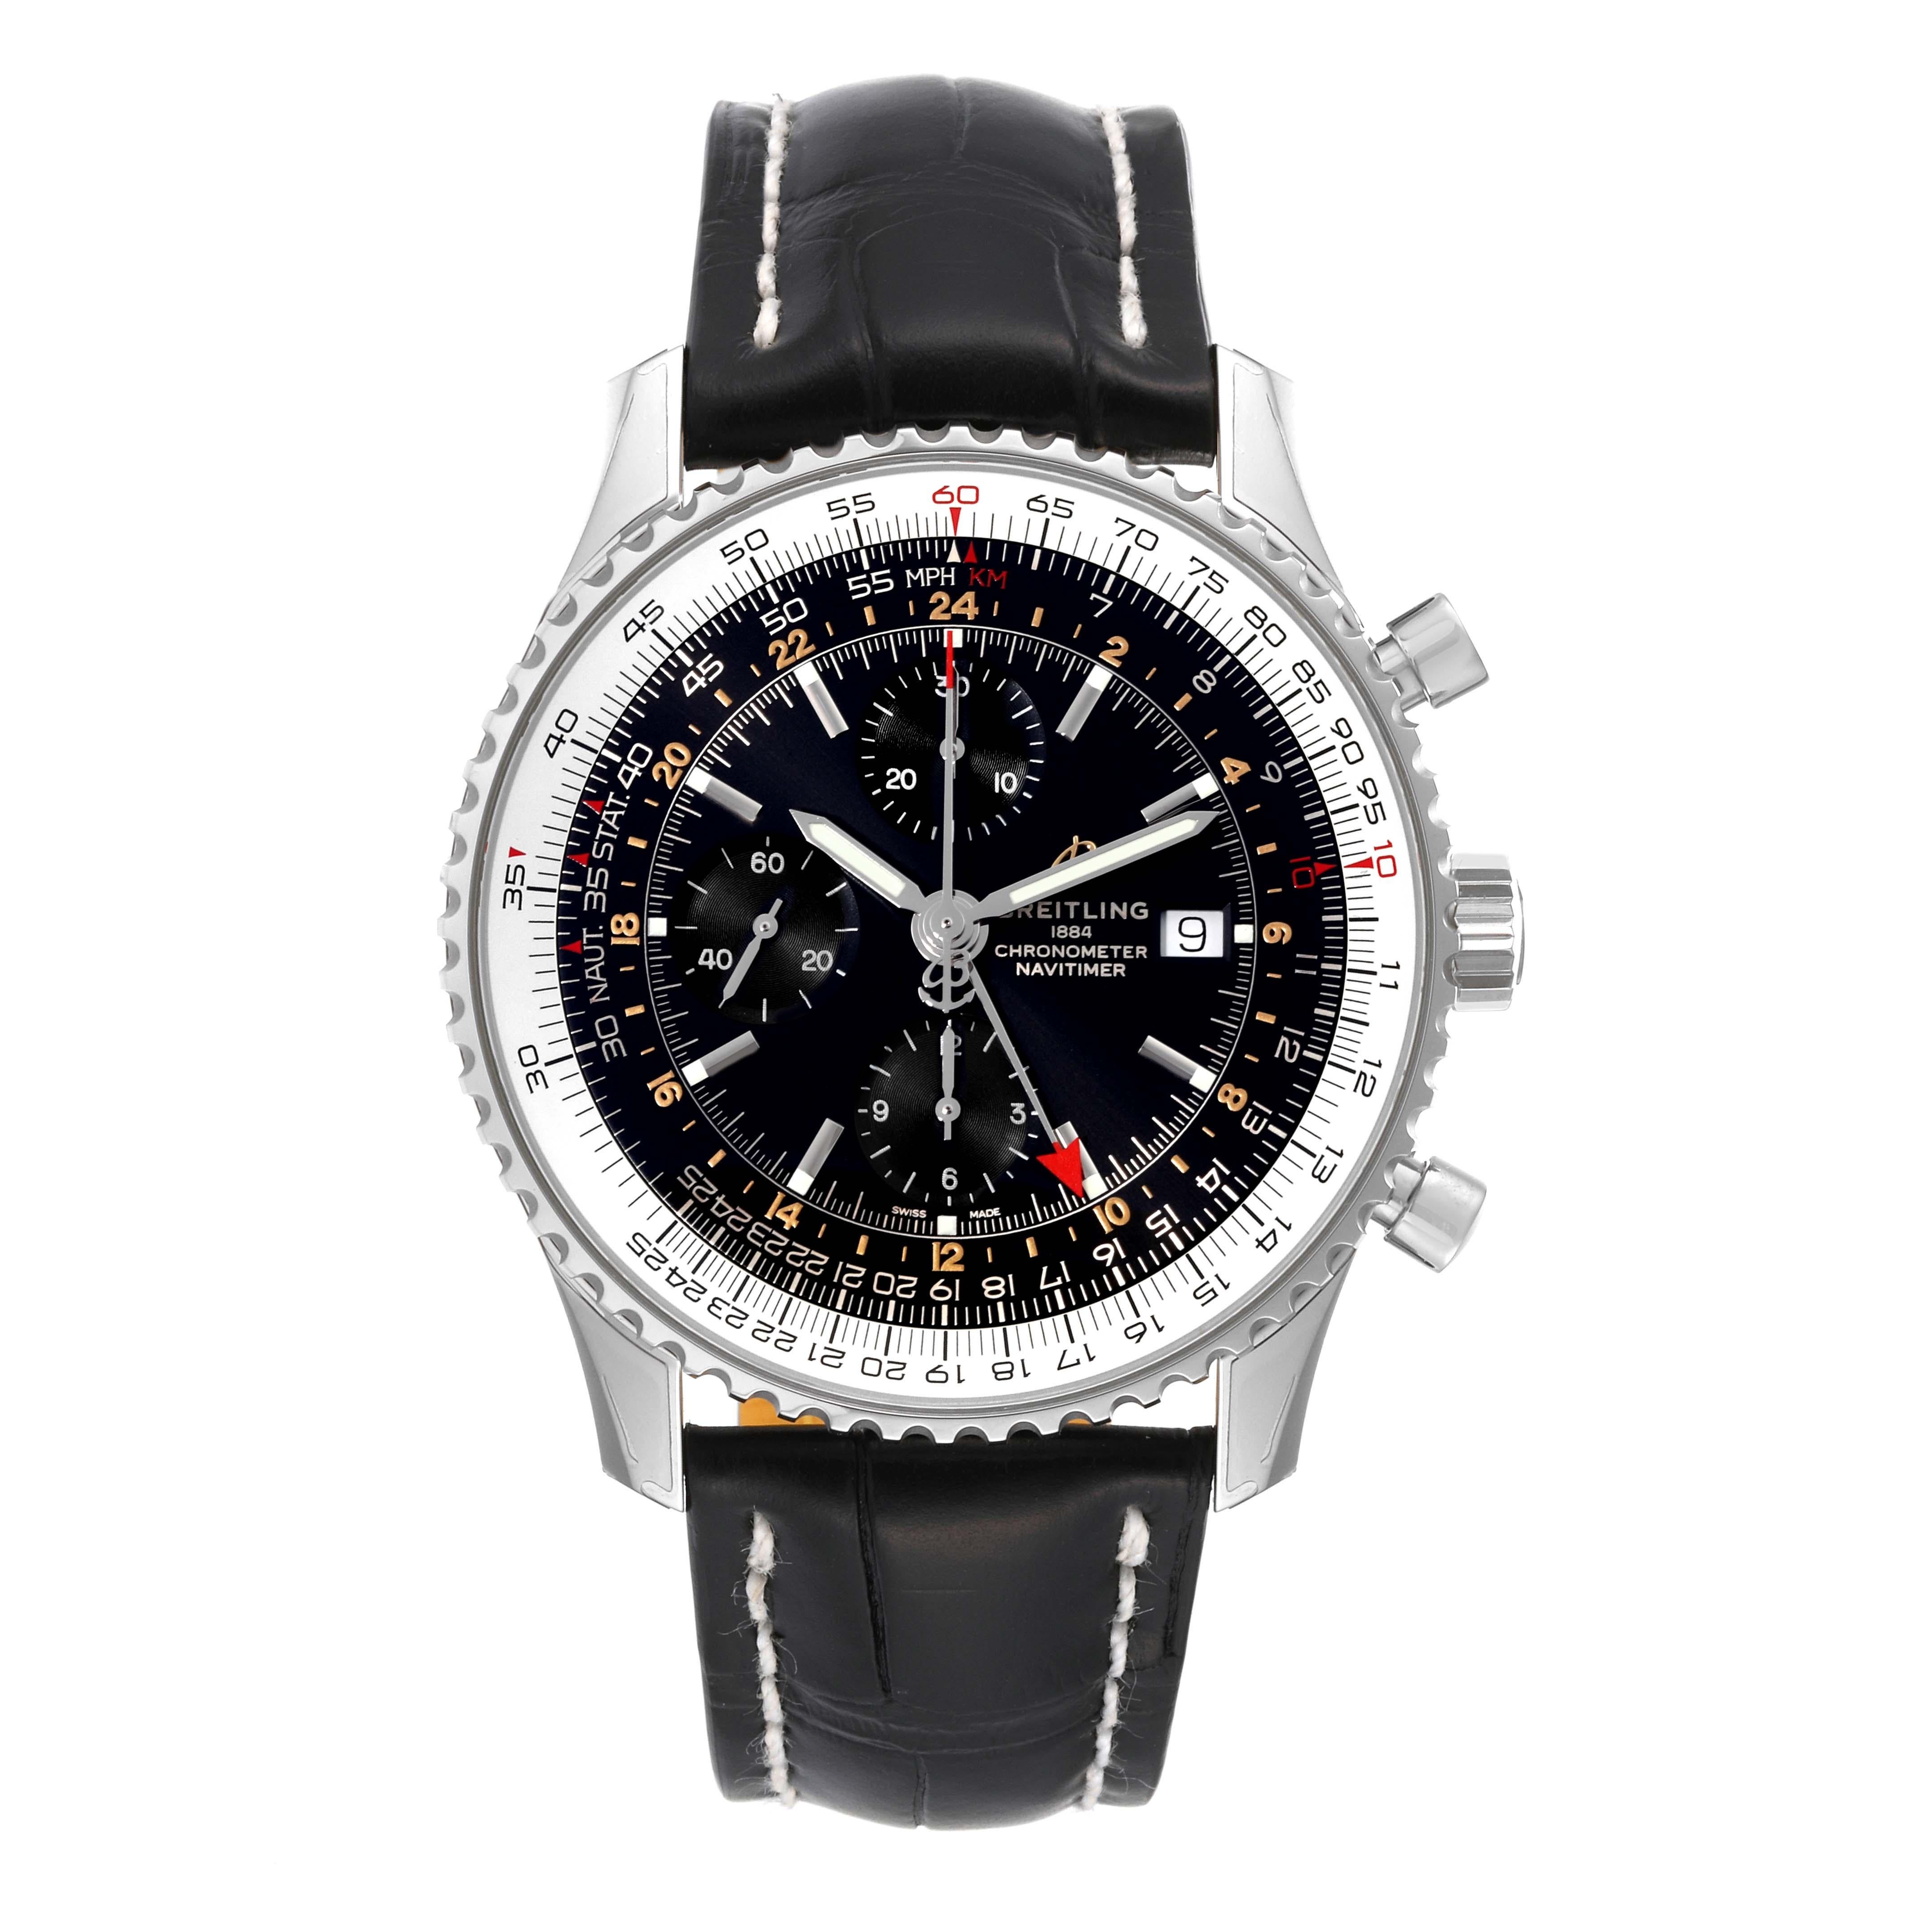 Breitling Navitimer World Black Dial Steel Mens Watch A24322 Unworn. Self-winding automatic officially certified chronometer movement. Chronograph function. Stainless steel case 46.0 mm in diameter. Stainless steel crown and pushers. Stainless steel